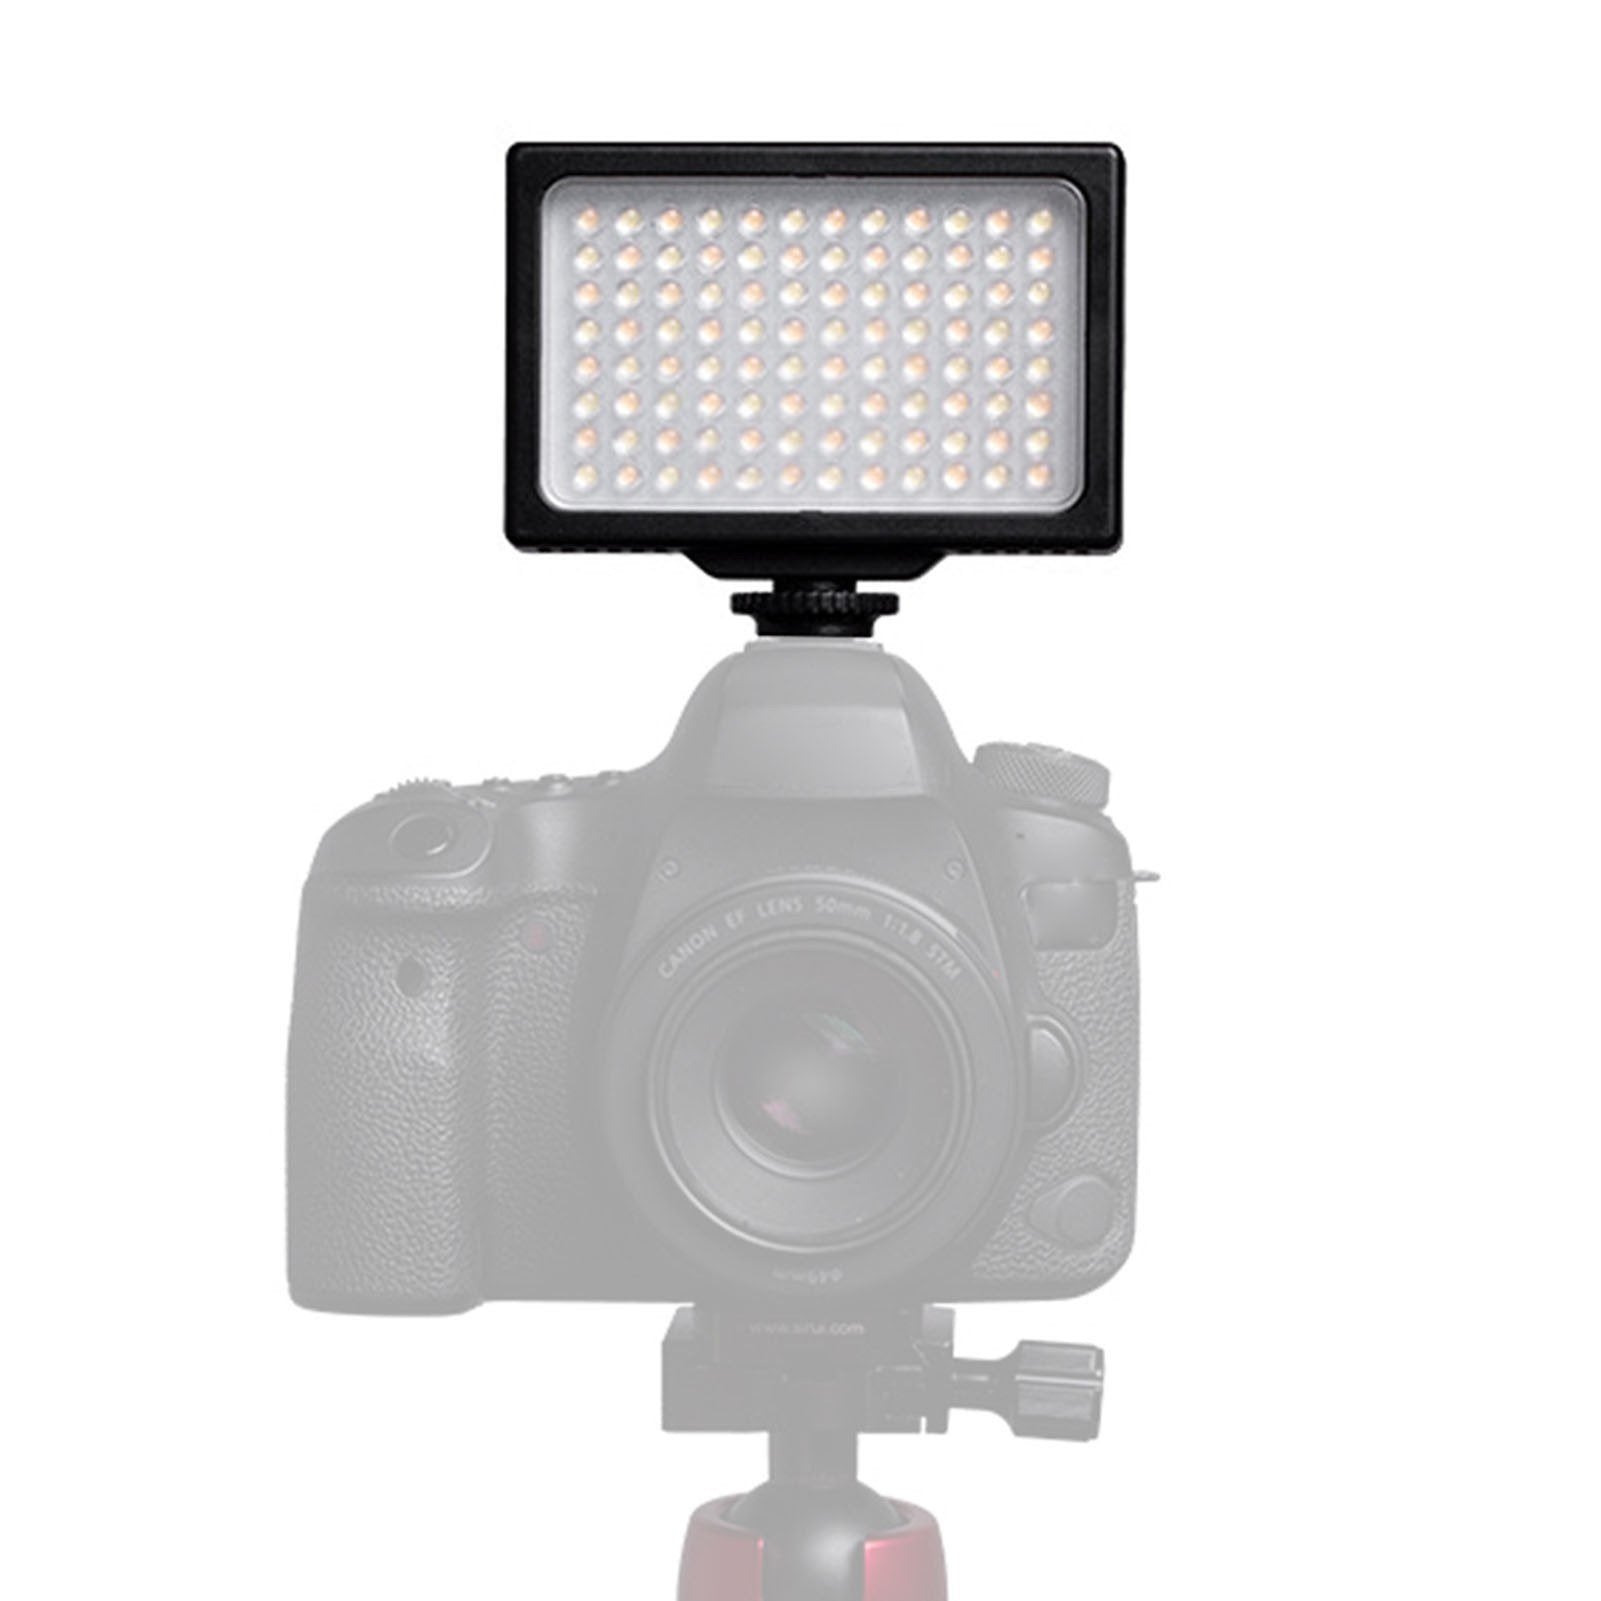 LED Video Light 3200K-5600K Dimmable Panel Portable Photography Fill